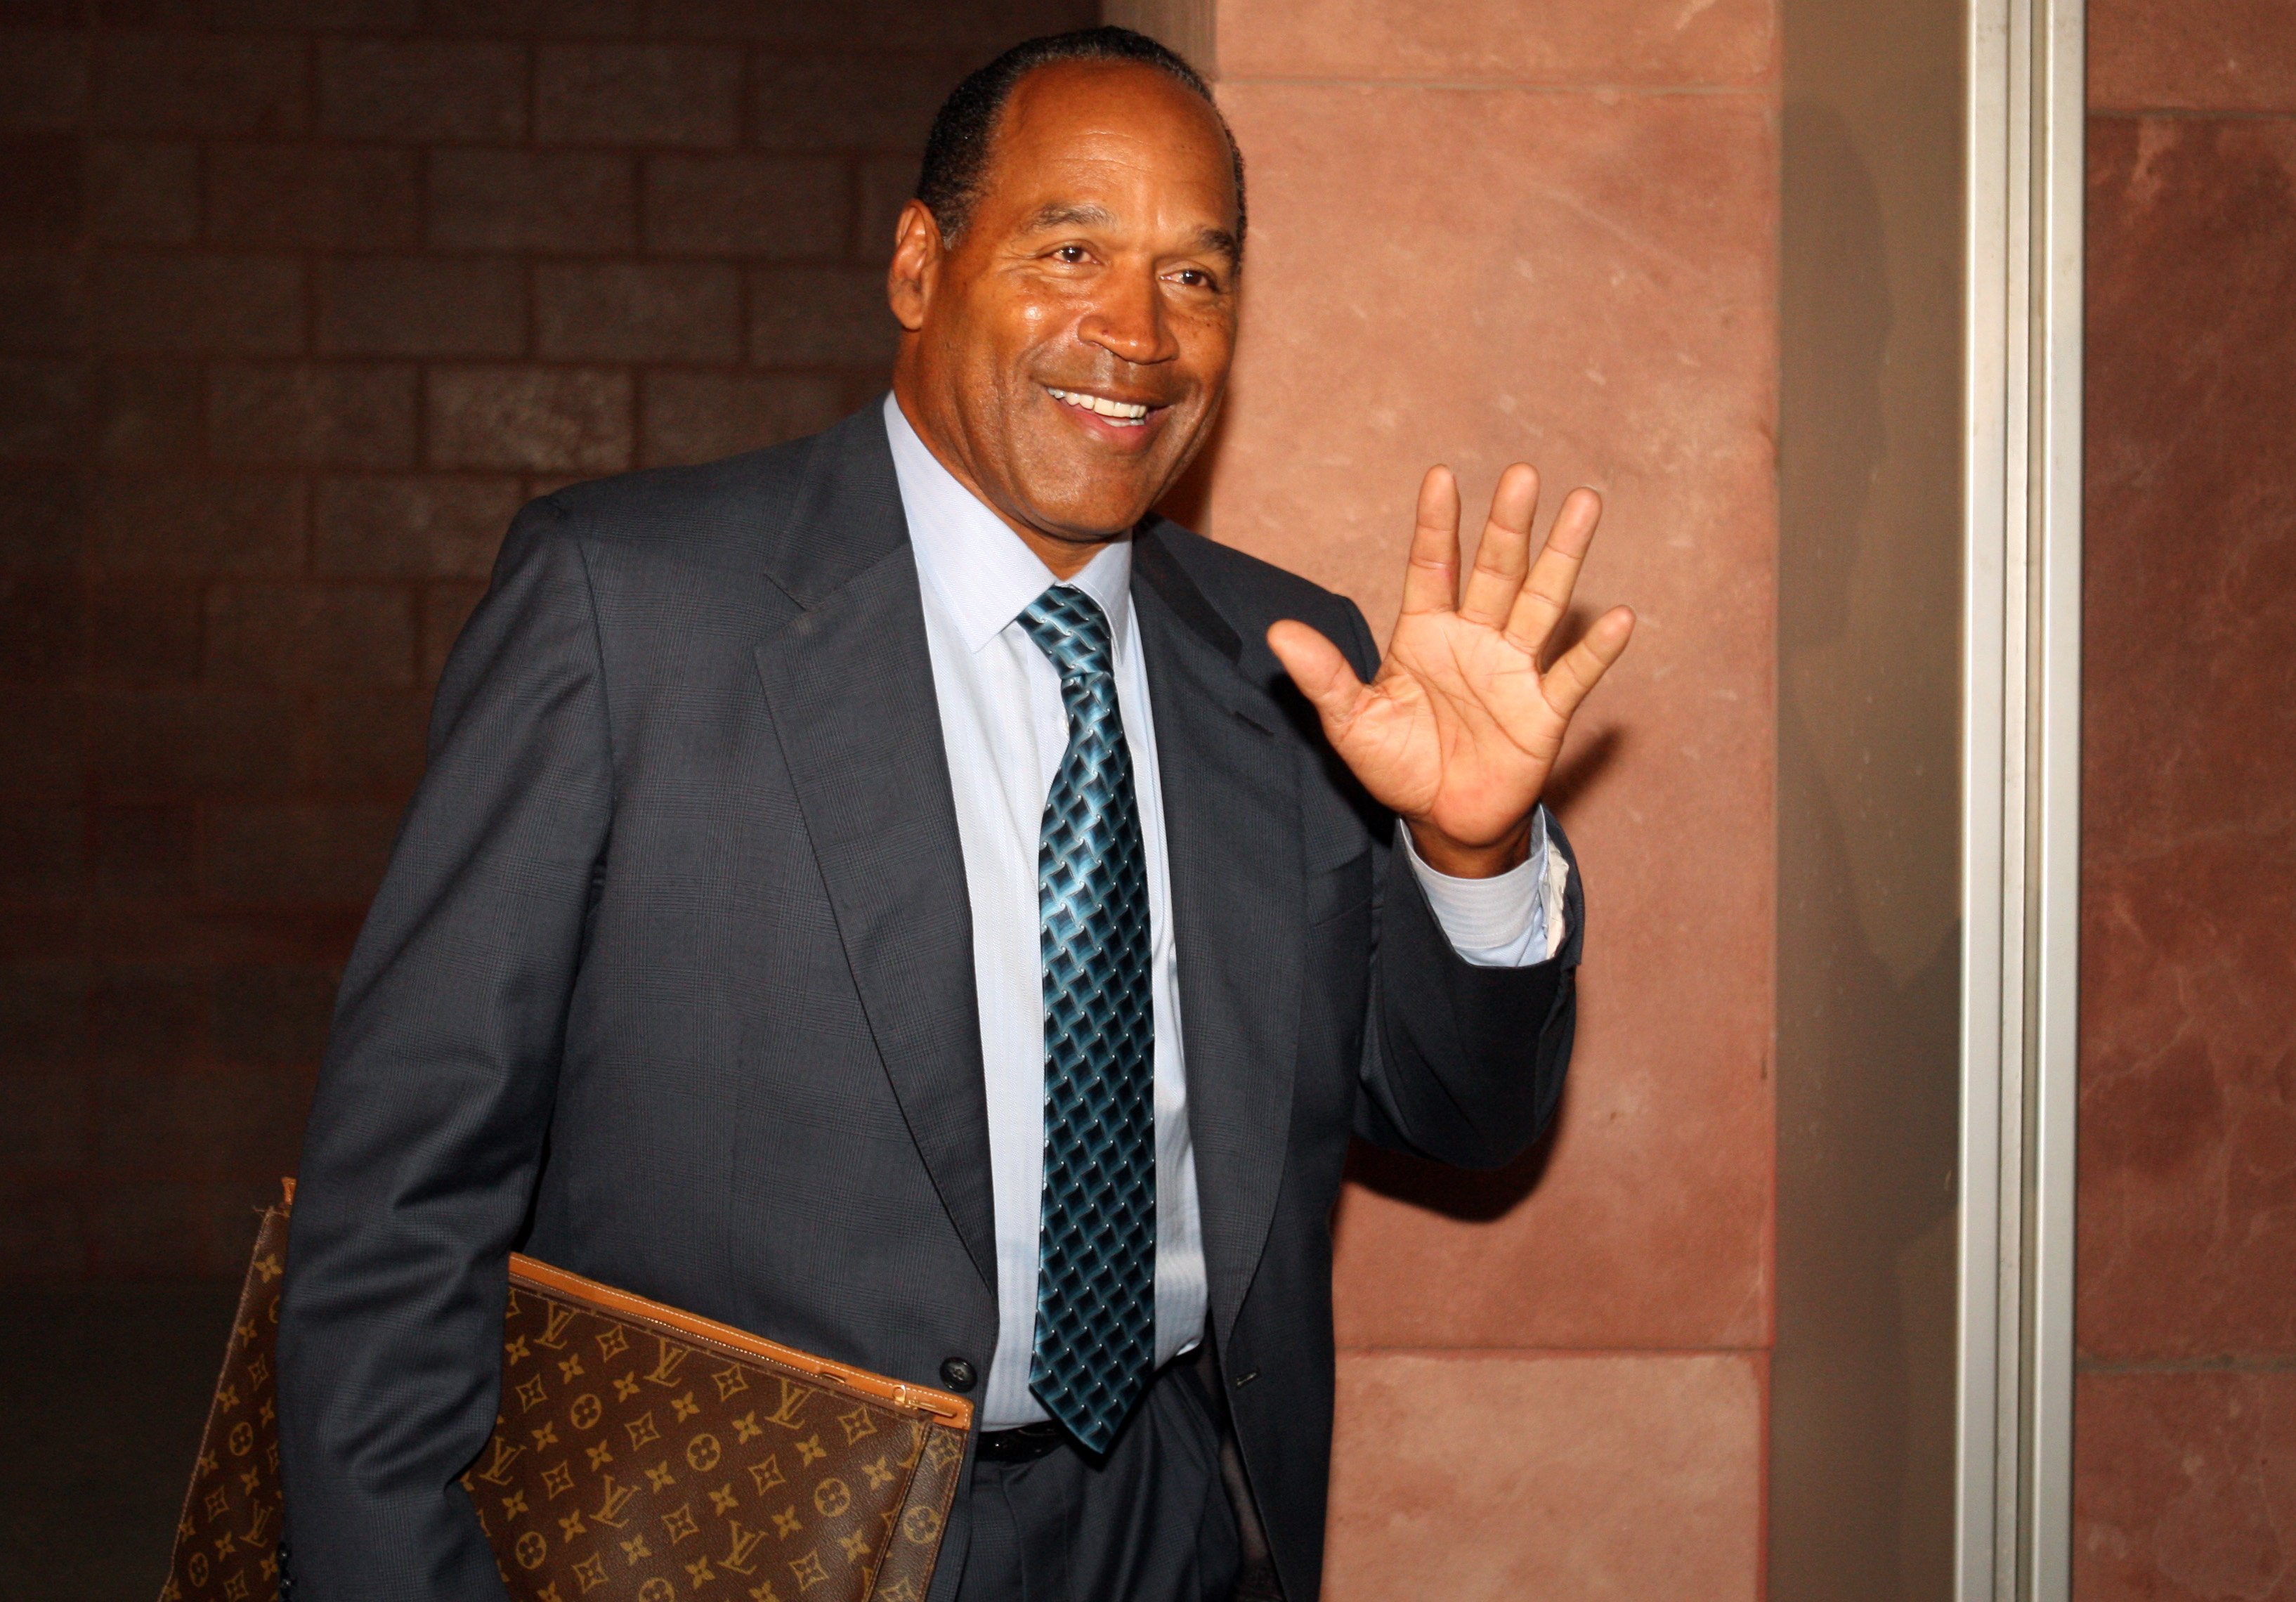 O.J. Simpson at the Clark County Regional Justice Center on October 2, 2008 in Las Vegas, Nevada | Source: Getty Images